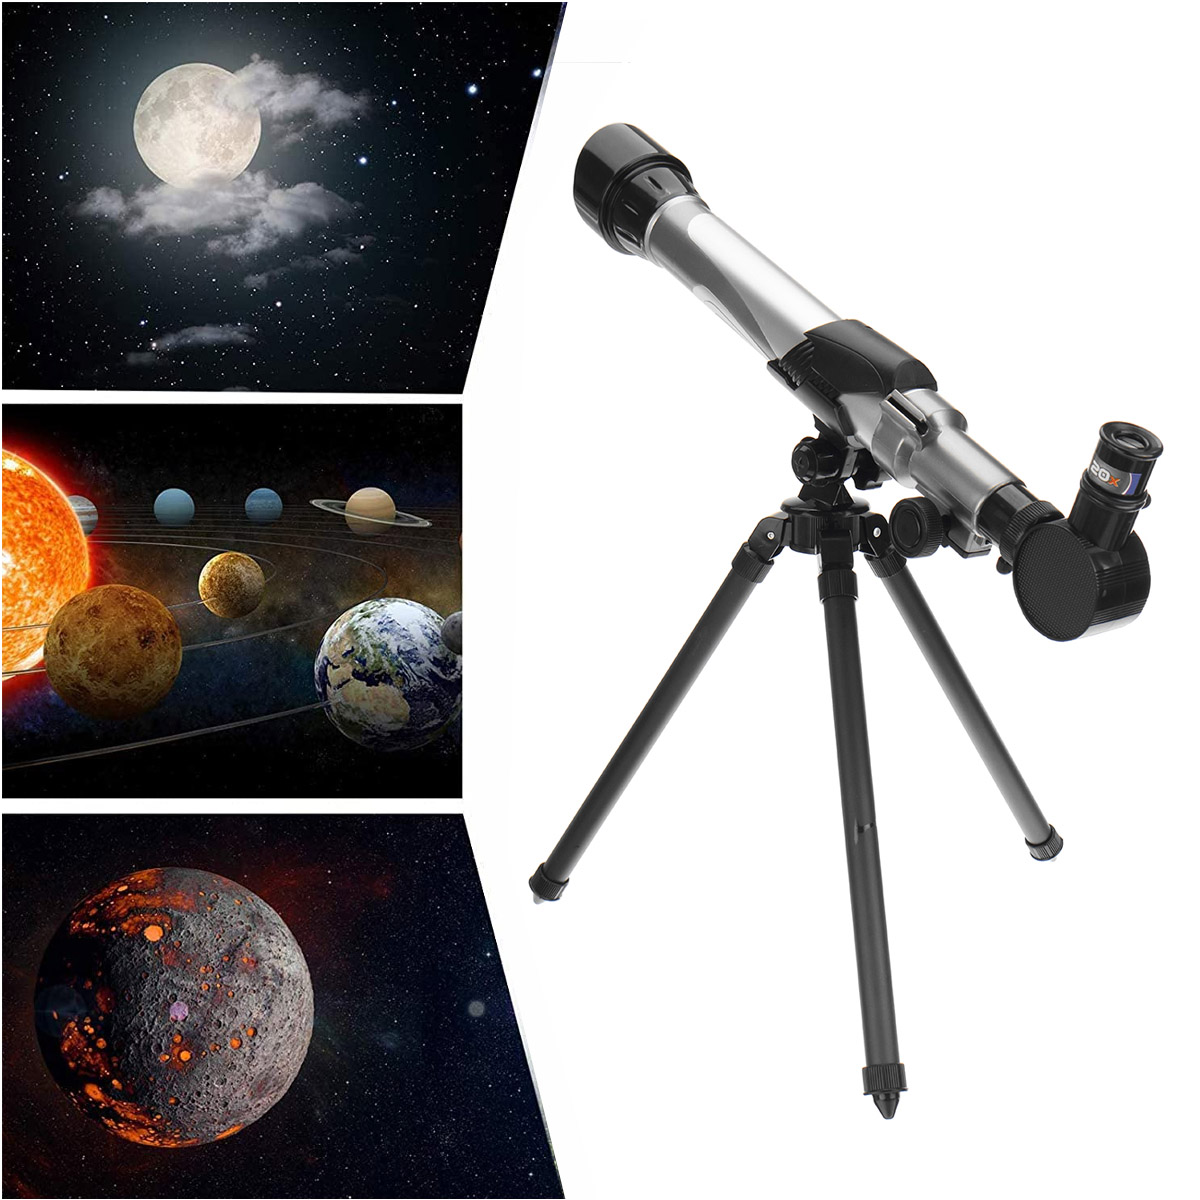 30-40X-Astronomical-Telescope-HD-Refraction-Optical-Monoculars-for-Adult-Kids-Beginners-with-Tripod-1836751-7